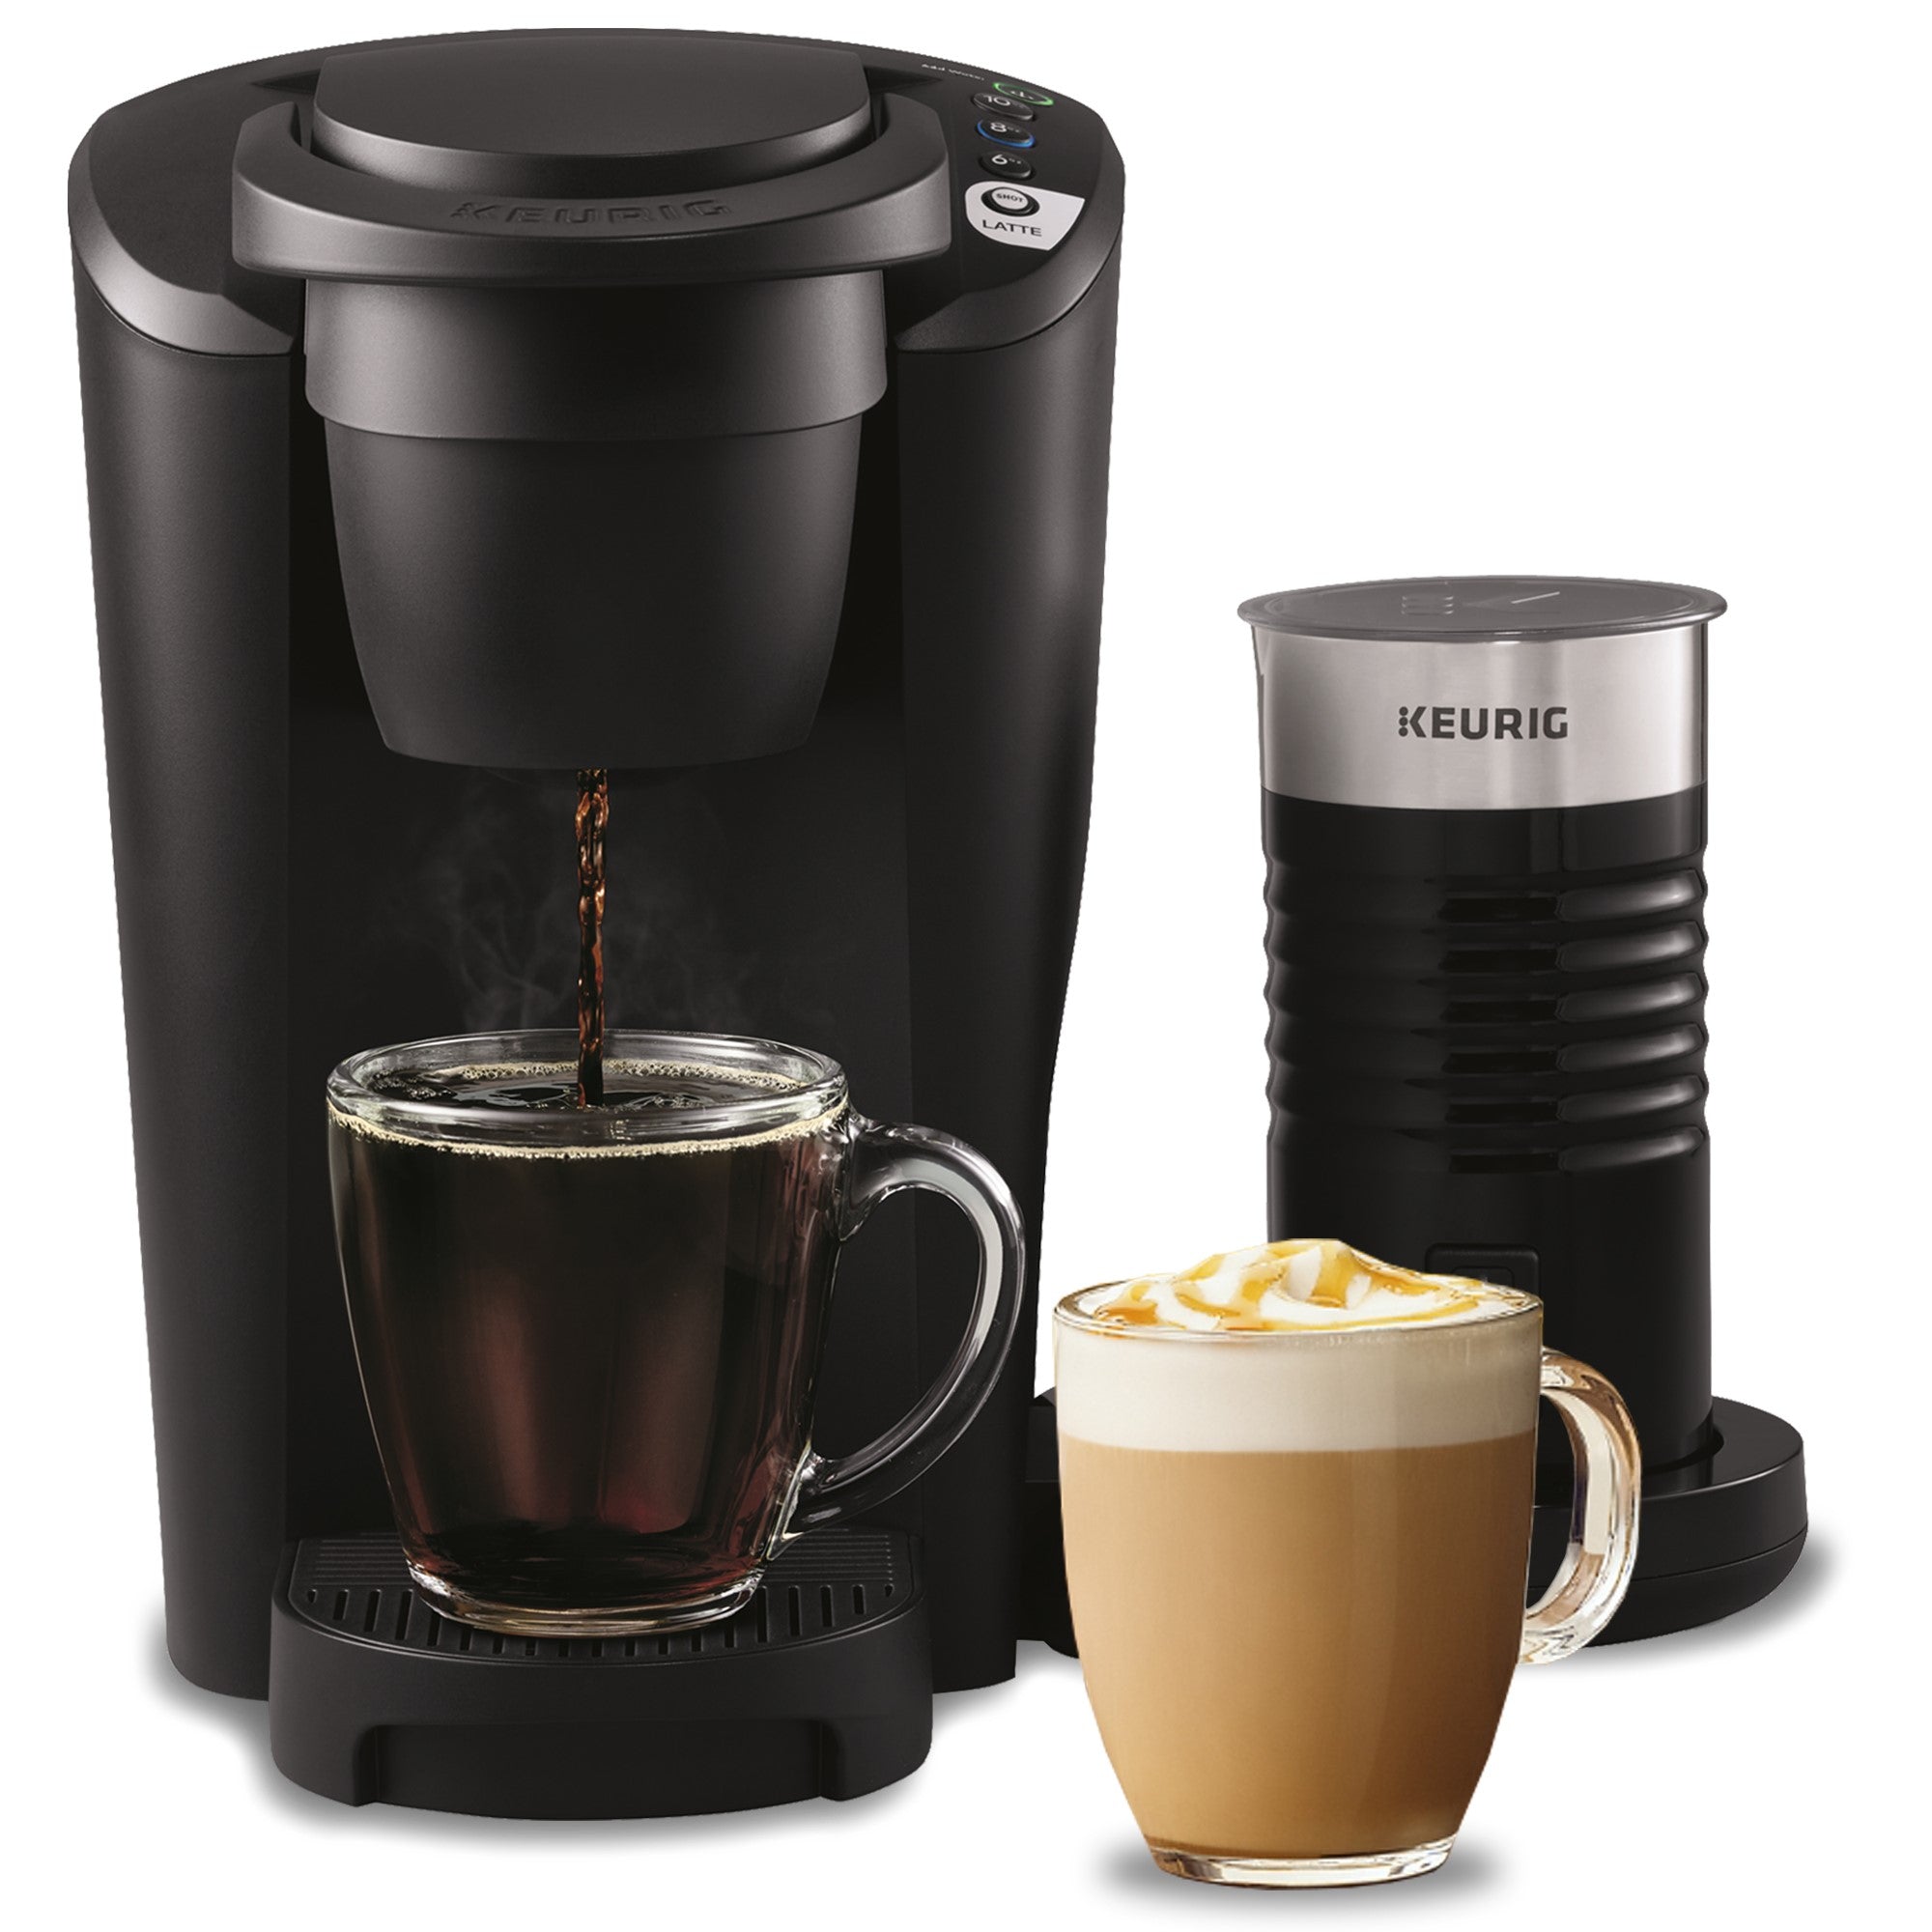 Keurig K-Latte Single Serve K-Cup Coffee and Latte Maker, Comes with Milk Frother, Compatible With all Keurig K-Cup Pods, Black Keurig K-Latte Single Serve